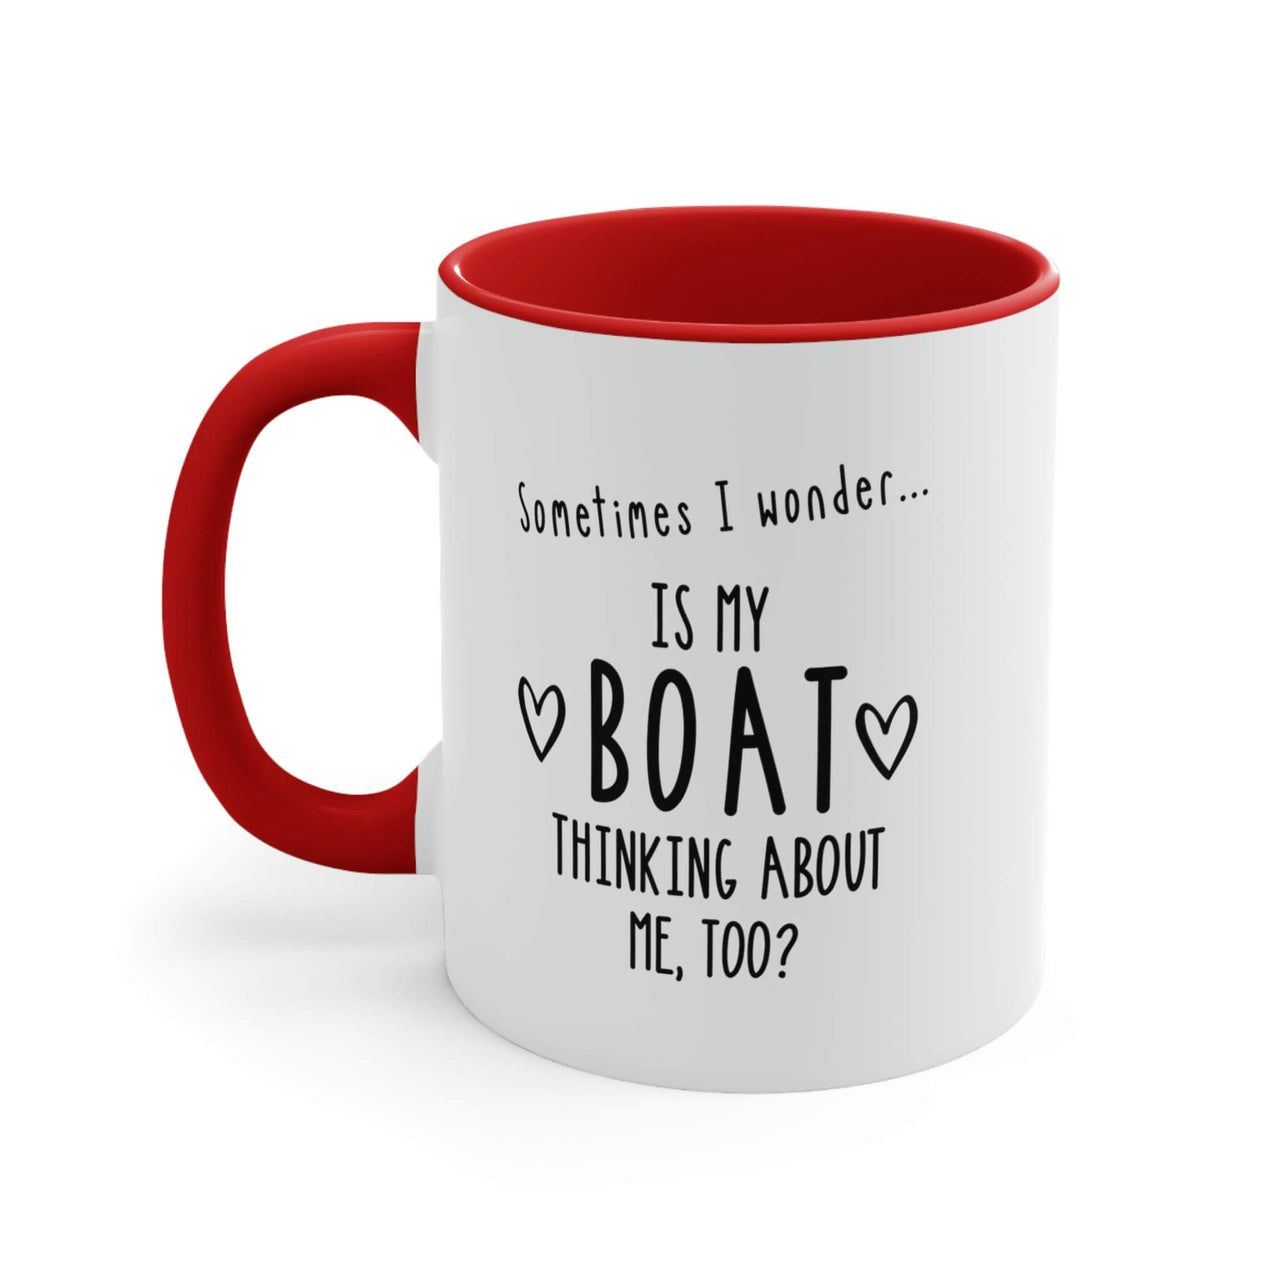 Is My Boat Thinking About Me Too Ceramic Coffee Mug, 5 Colors Mugs New England Trading Co Red  